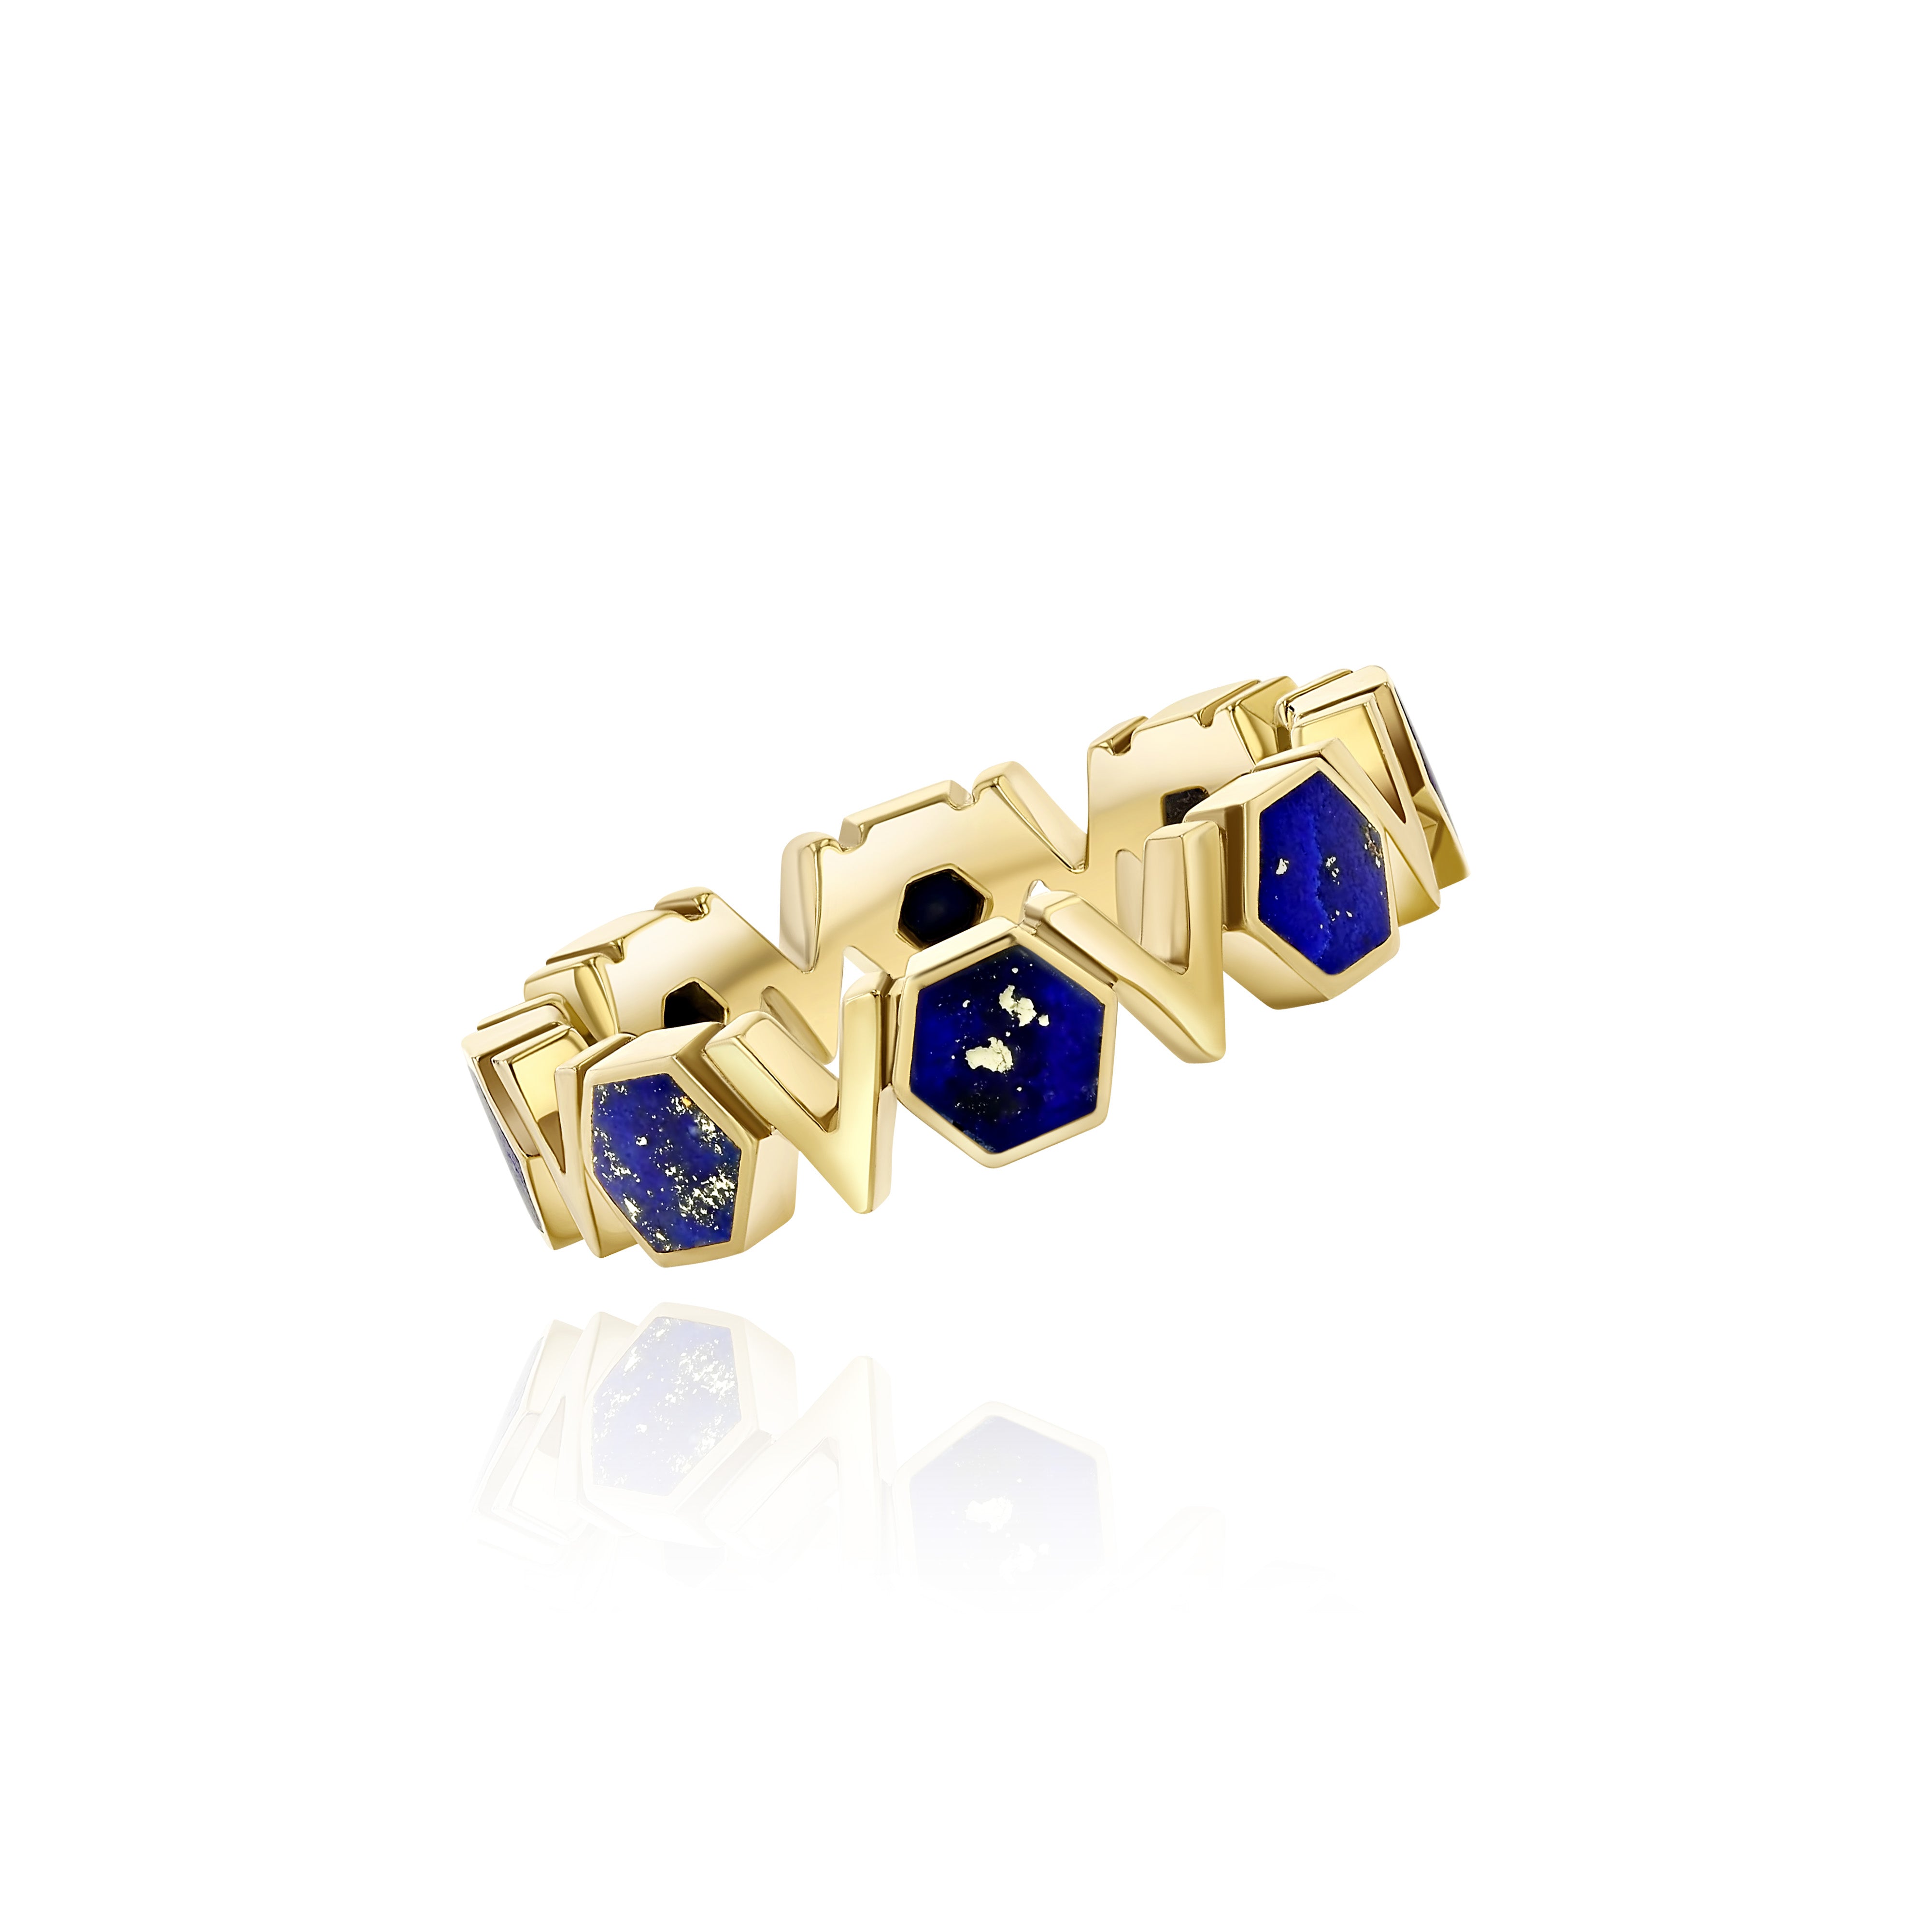 Gold Plated Silver Band with repeating Lapis stone octagons and V shapes, Medium